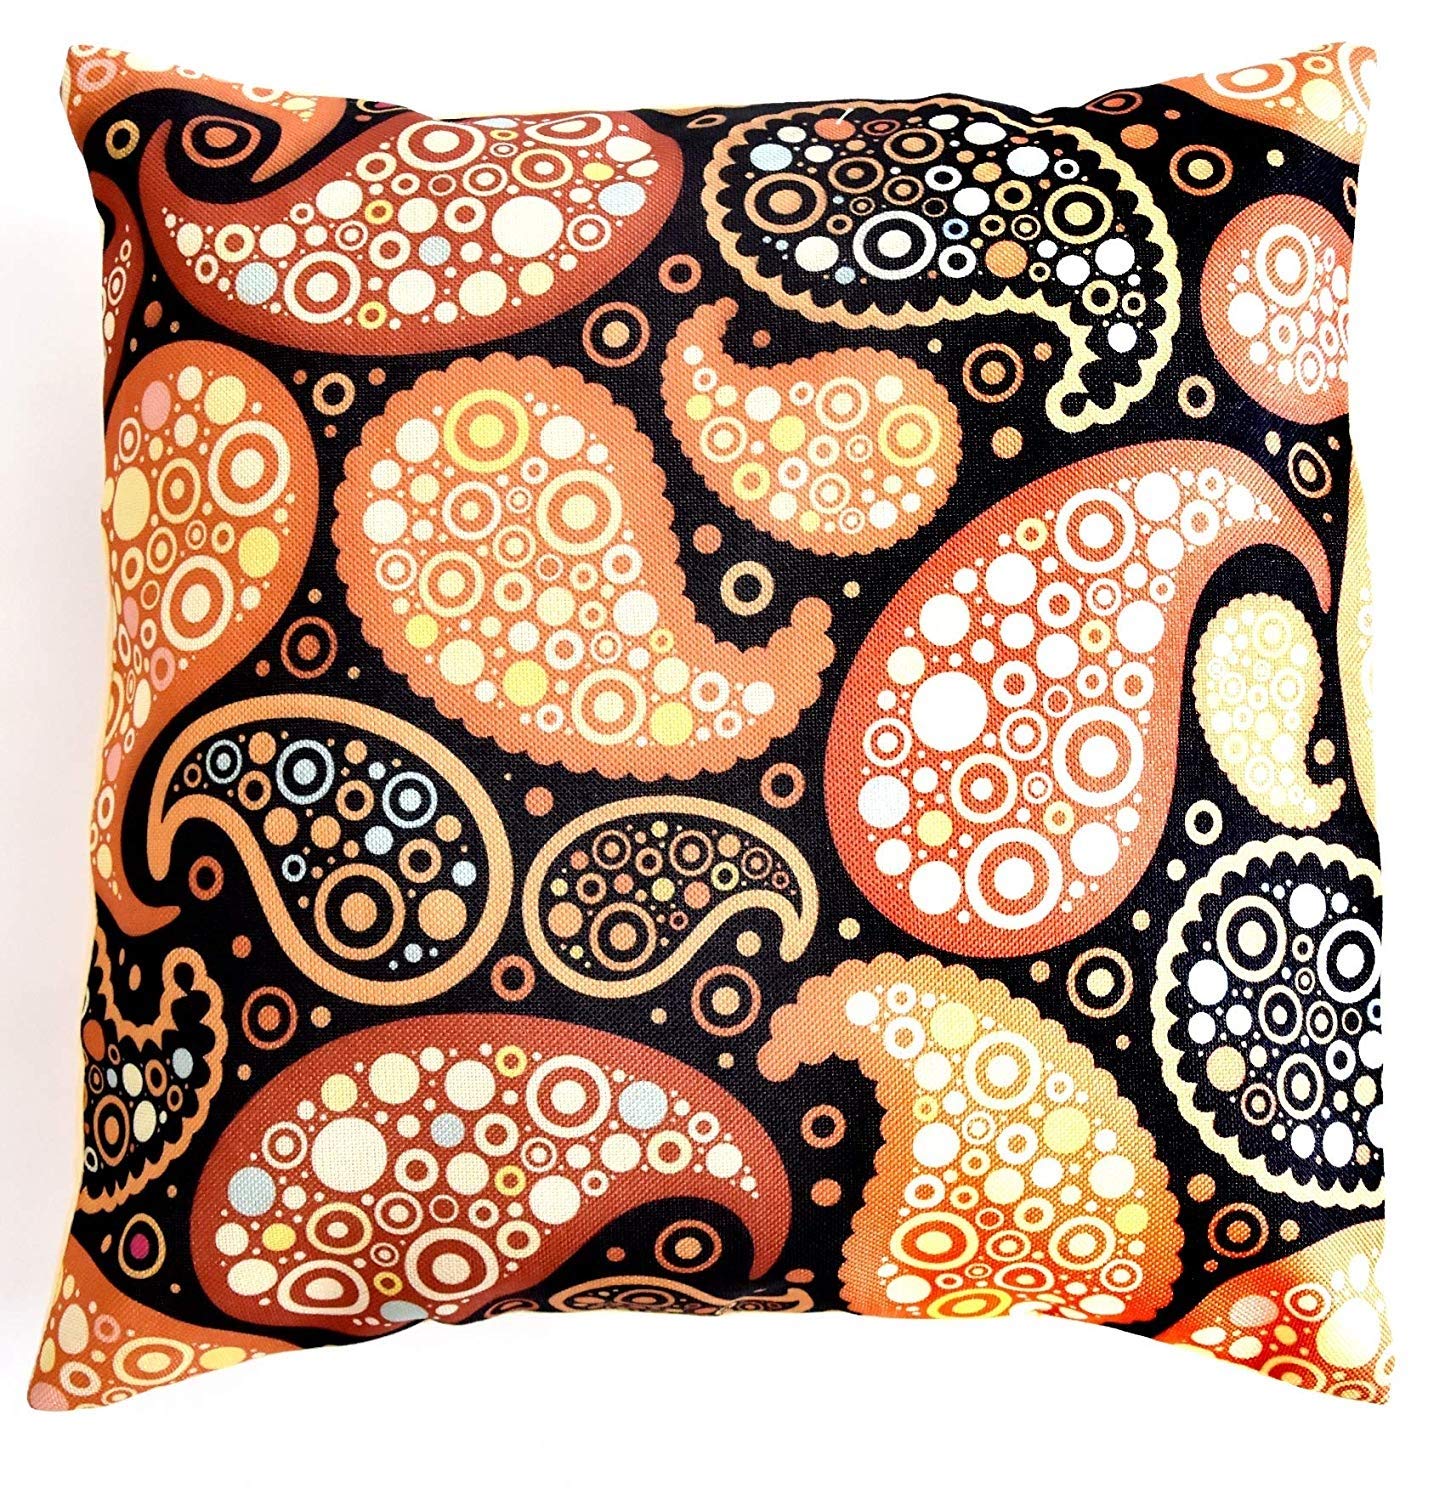 Cushion Covers: Set of 5 Multi Colored Decorative Hand Made Cotton Cushion Covers